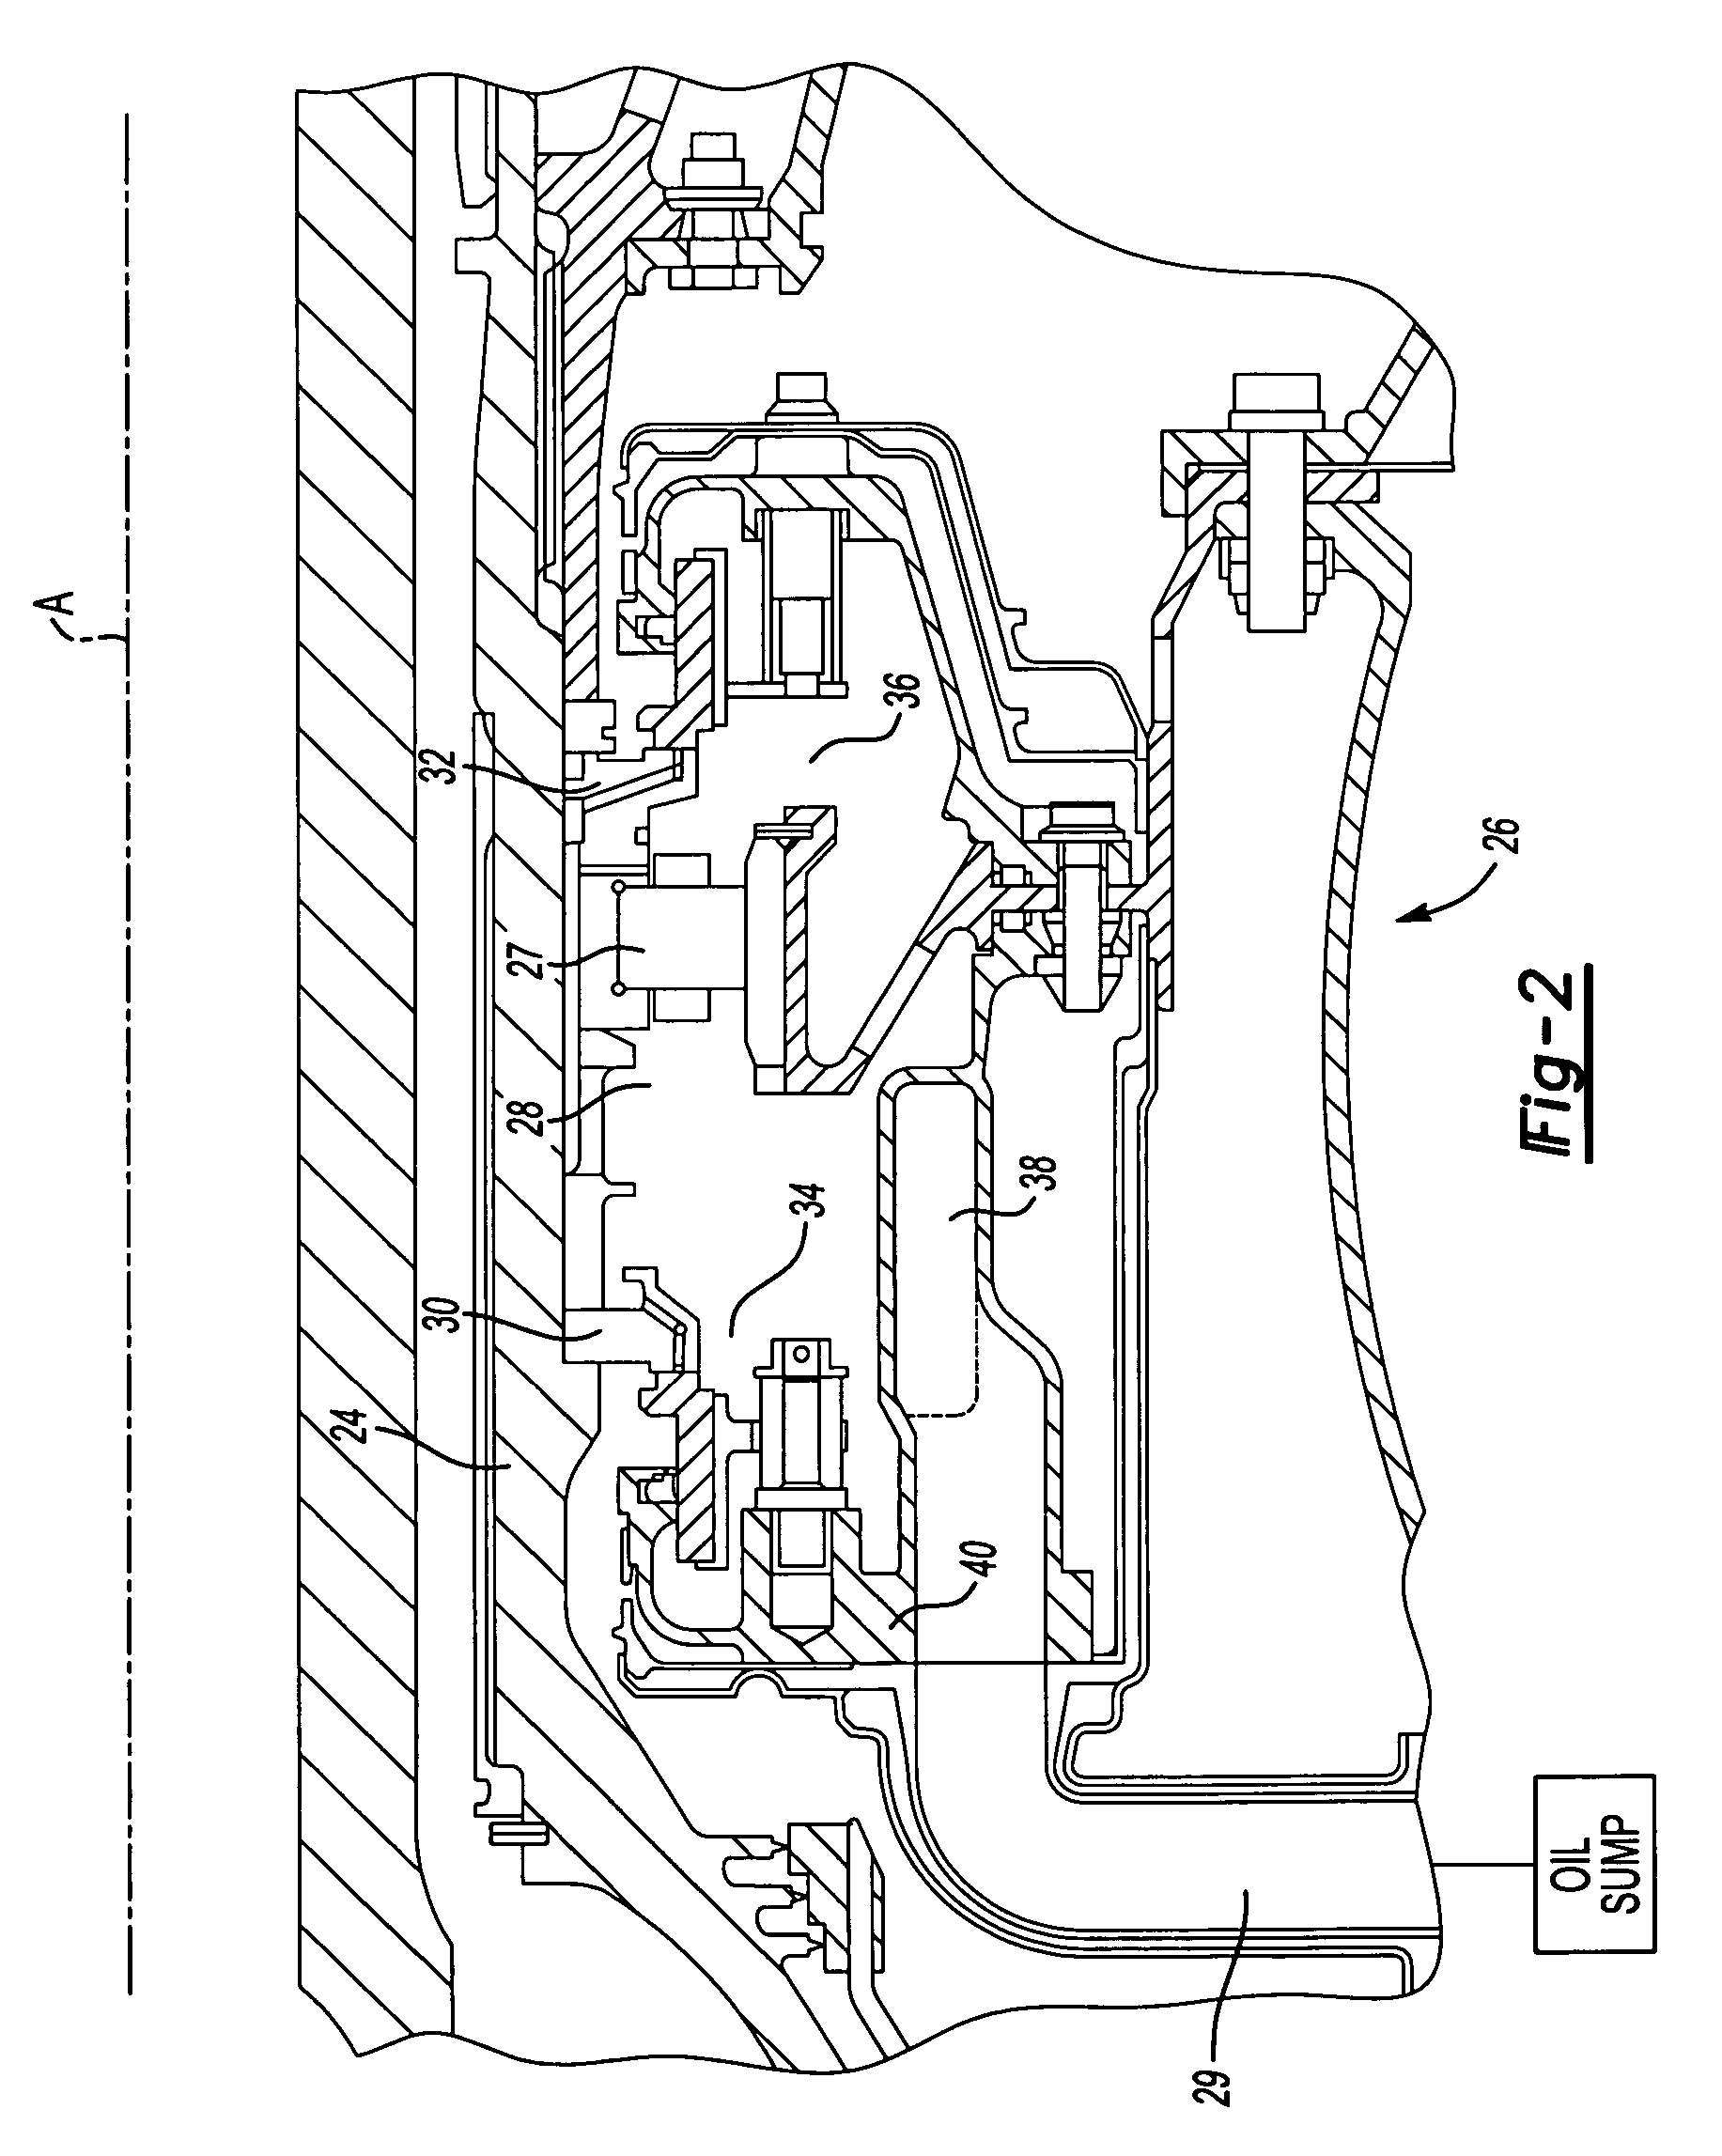 Method of scavenging oil within a gas turbine engine